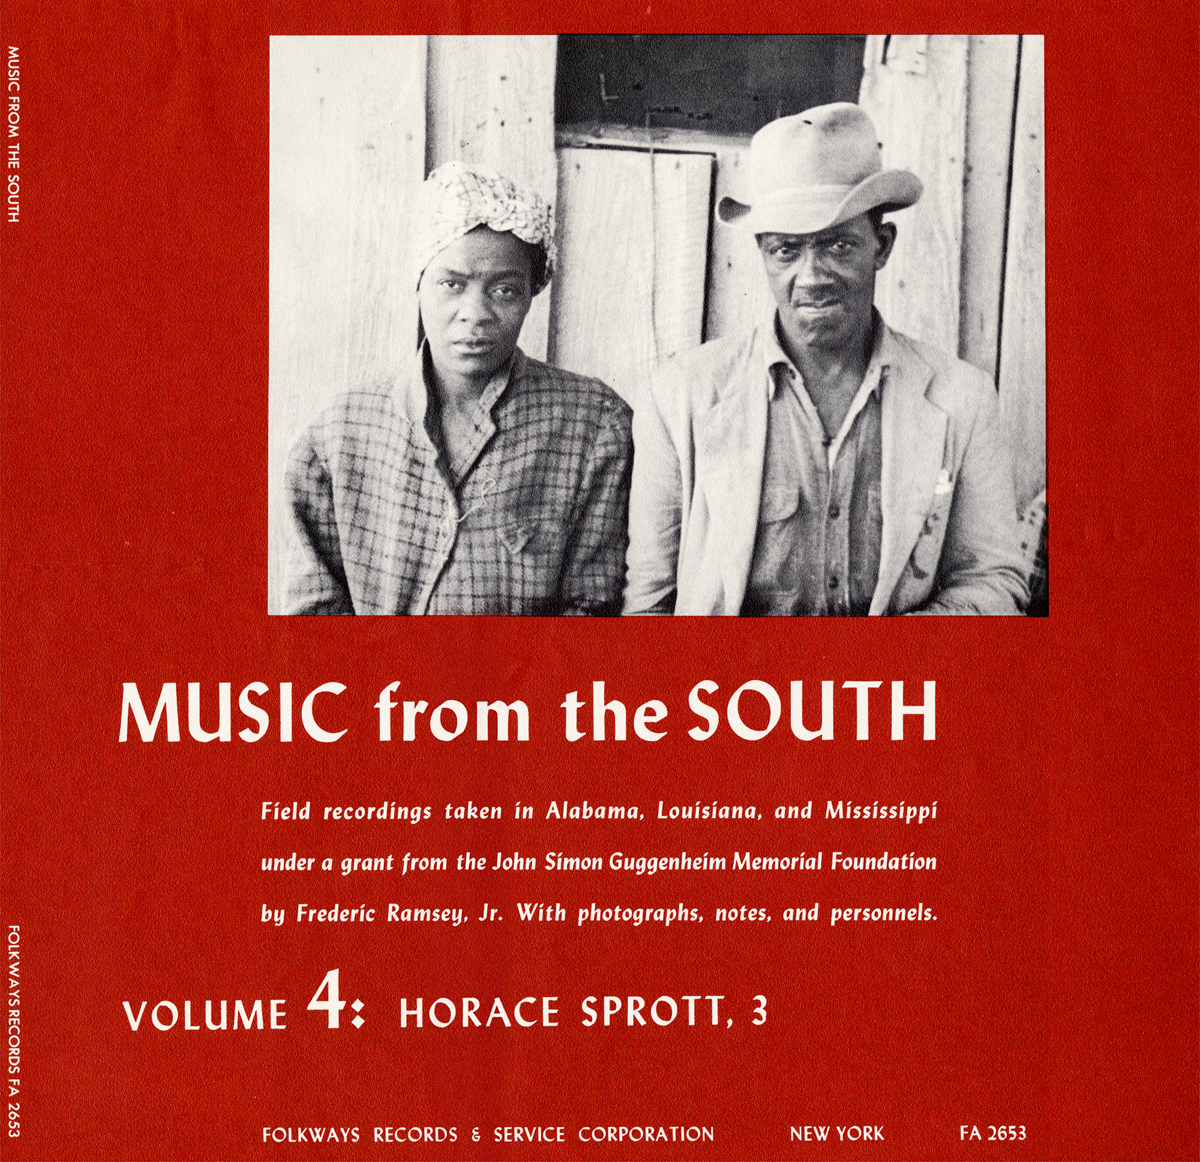 MUSIC FROM THE SOUTH VOL. 4: HORACE SPROTT 3